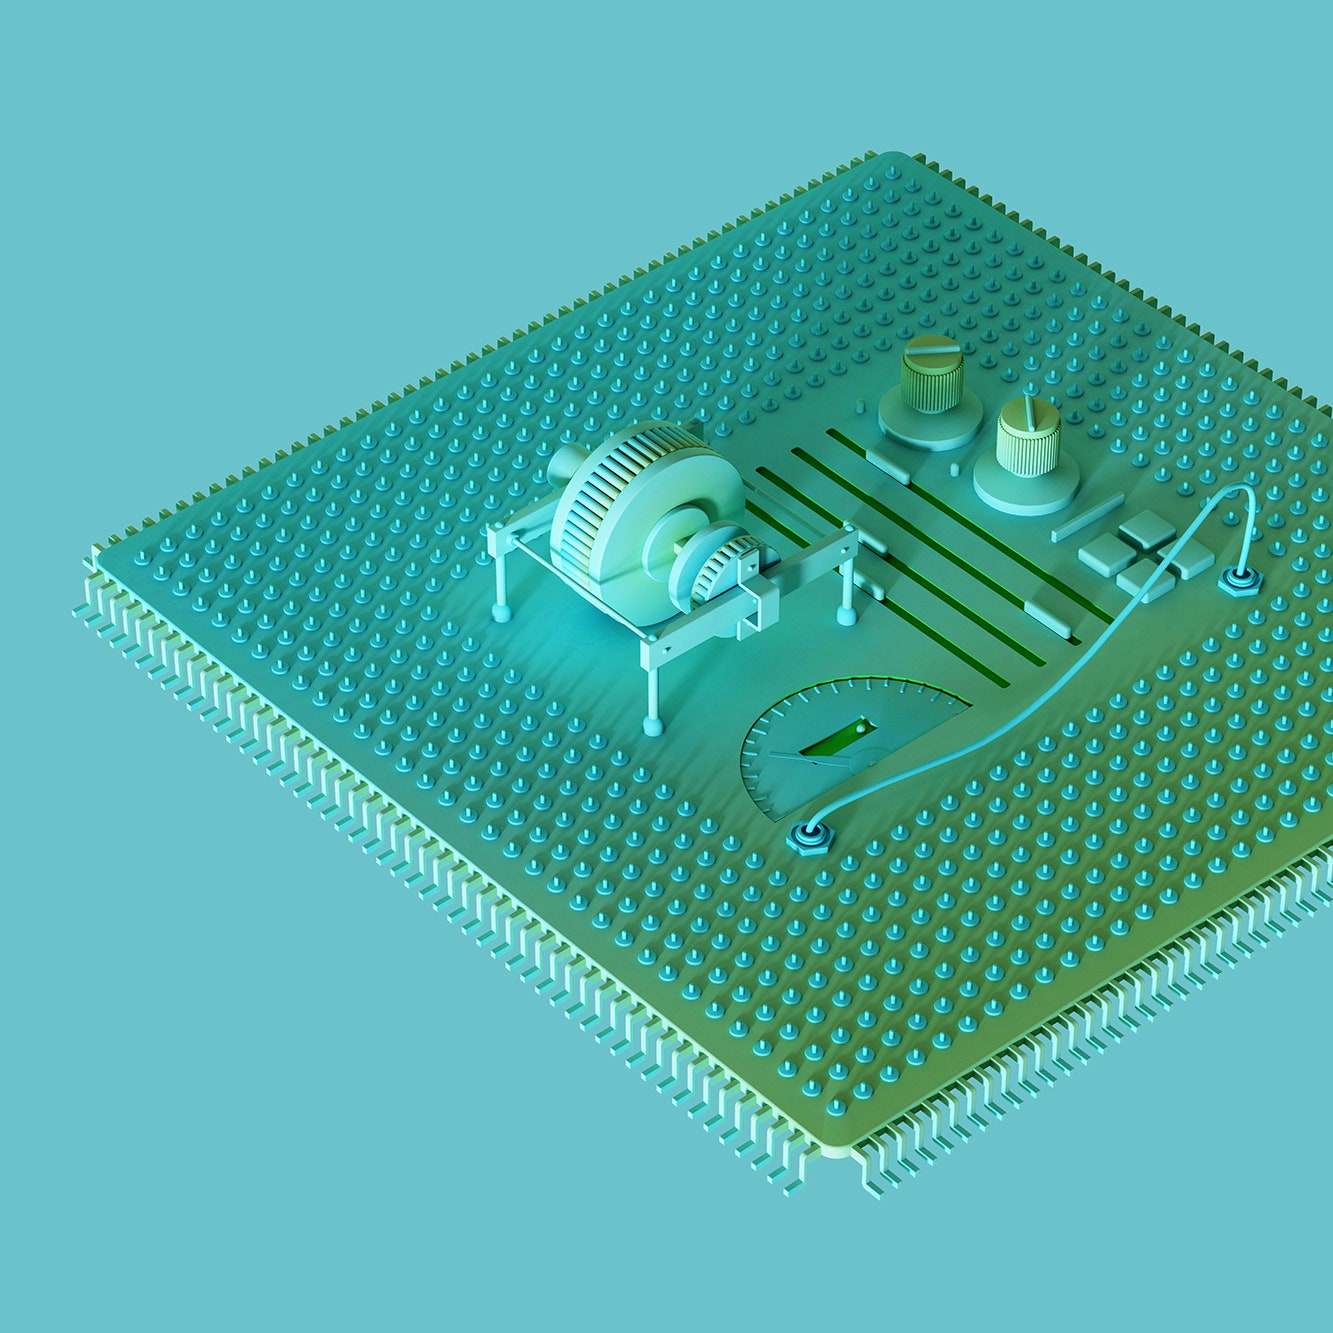 Illustration of a computer chip with analog components